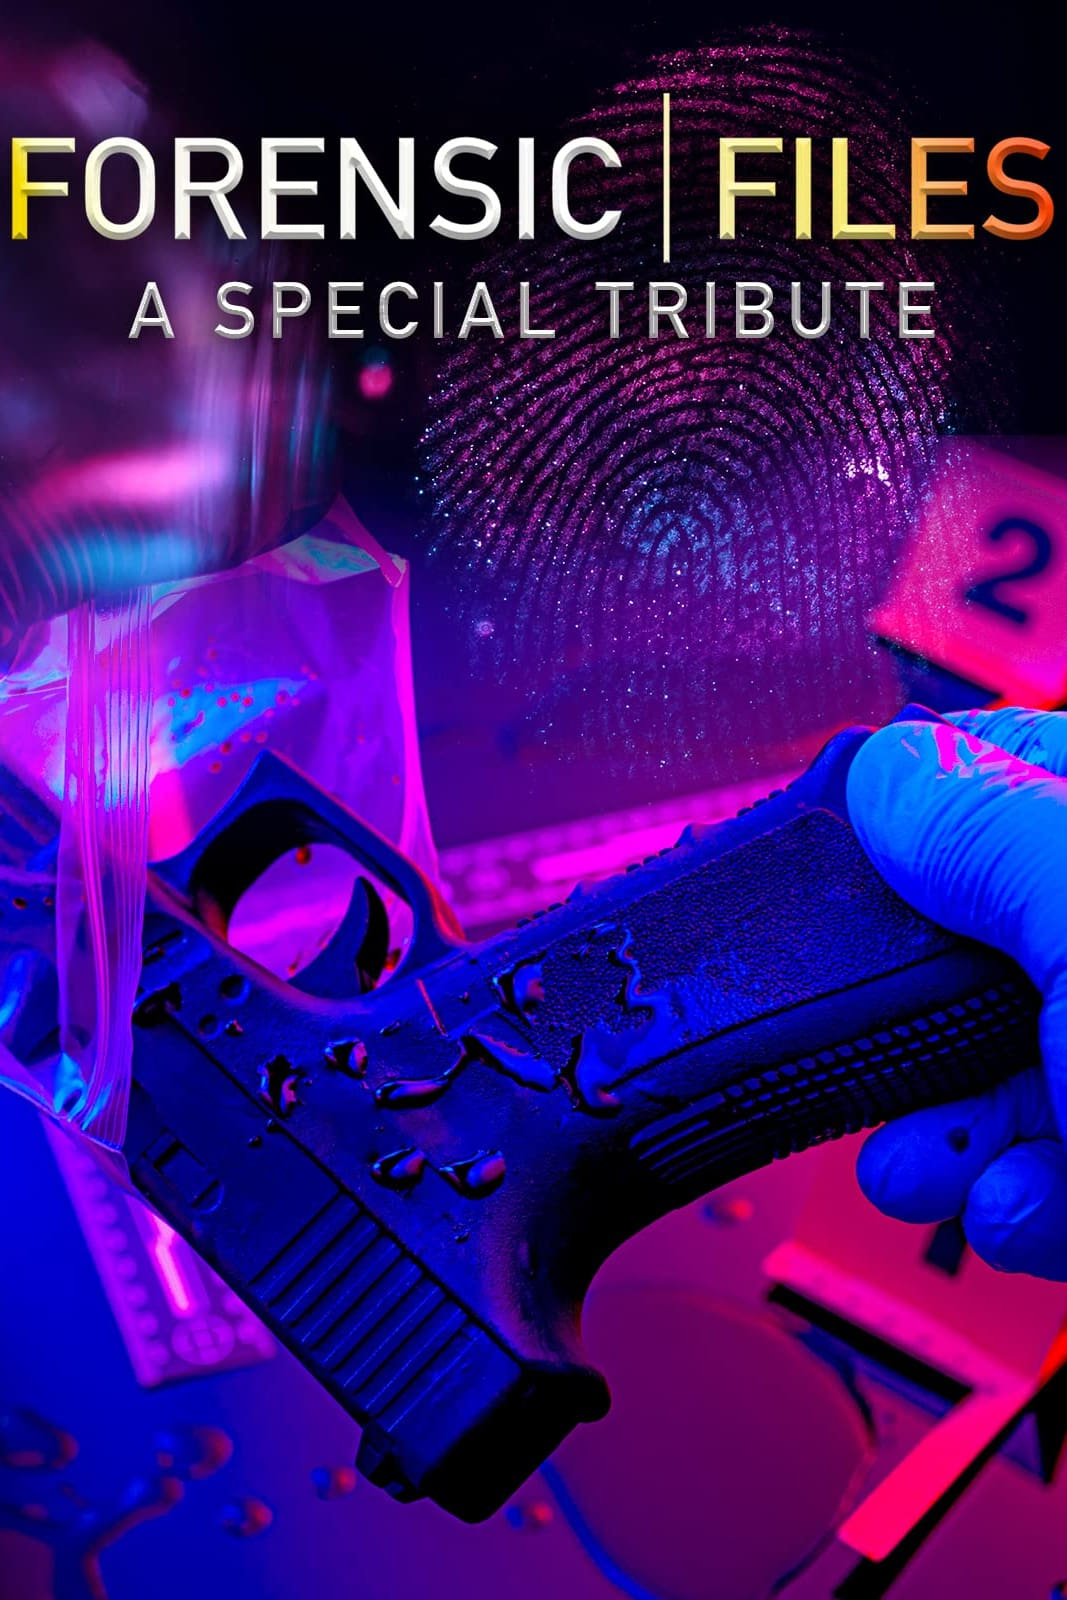 Forensic Files: A Special Tribute